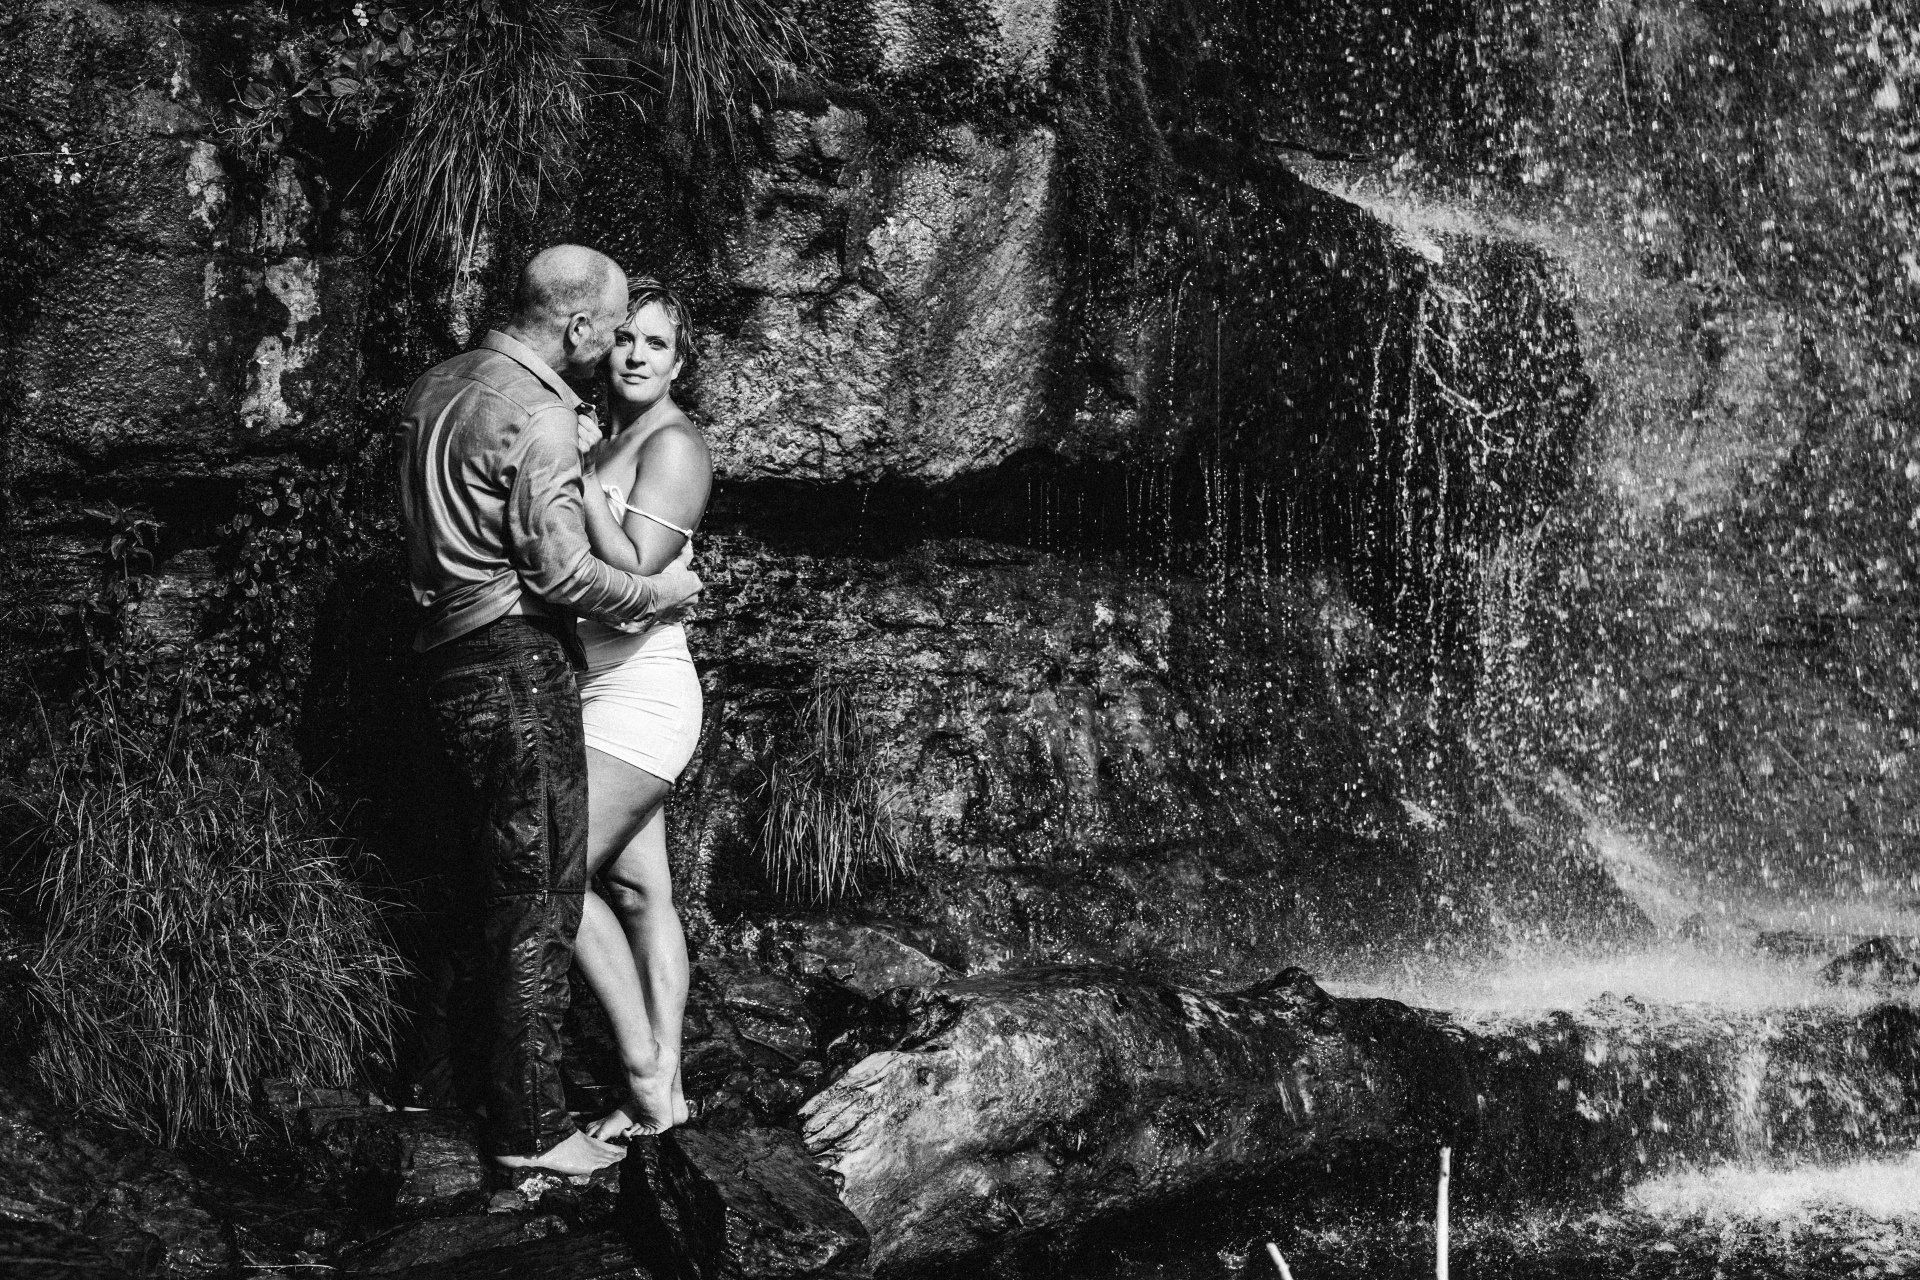 A couple standing in front of a waterfall, enjoying the scenic beauty and feeling the mist on their faces.